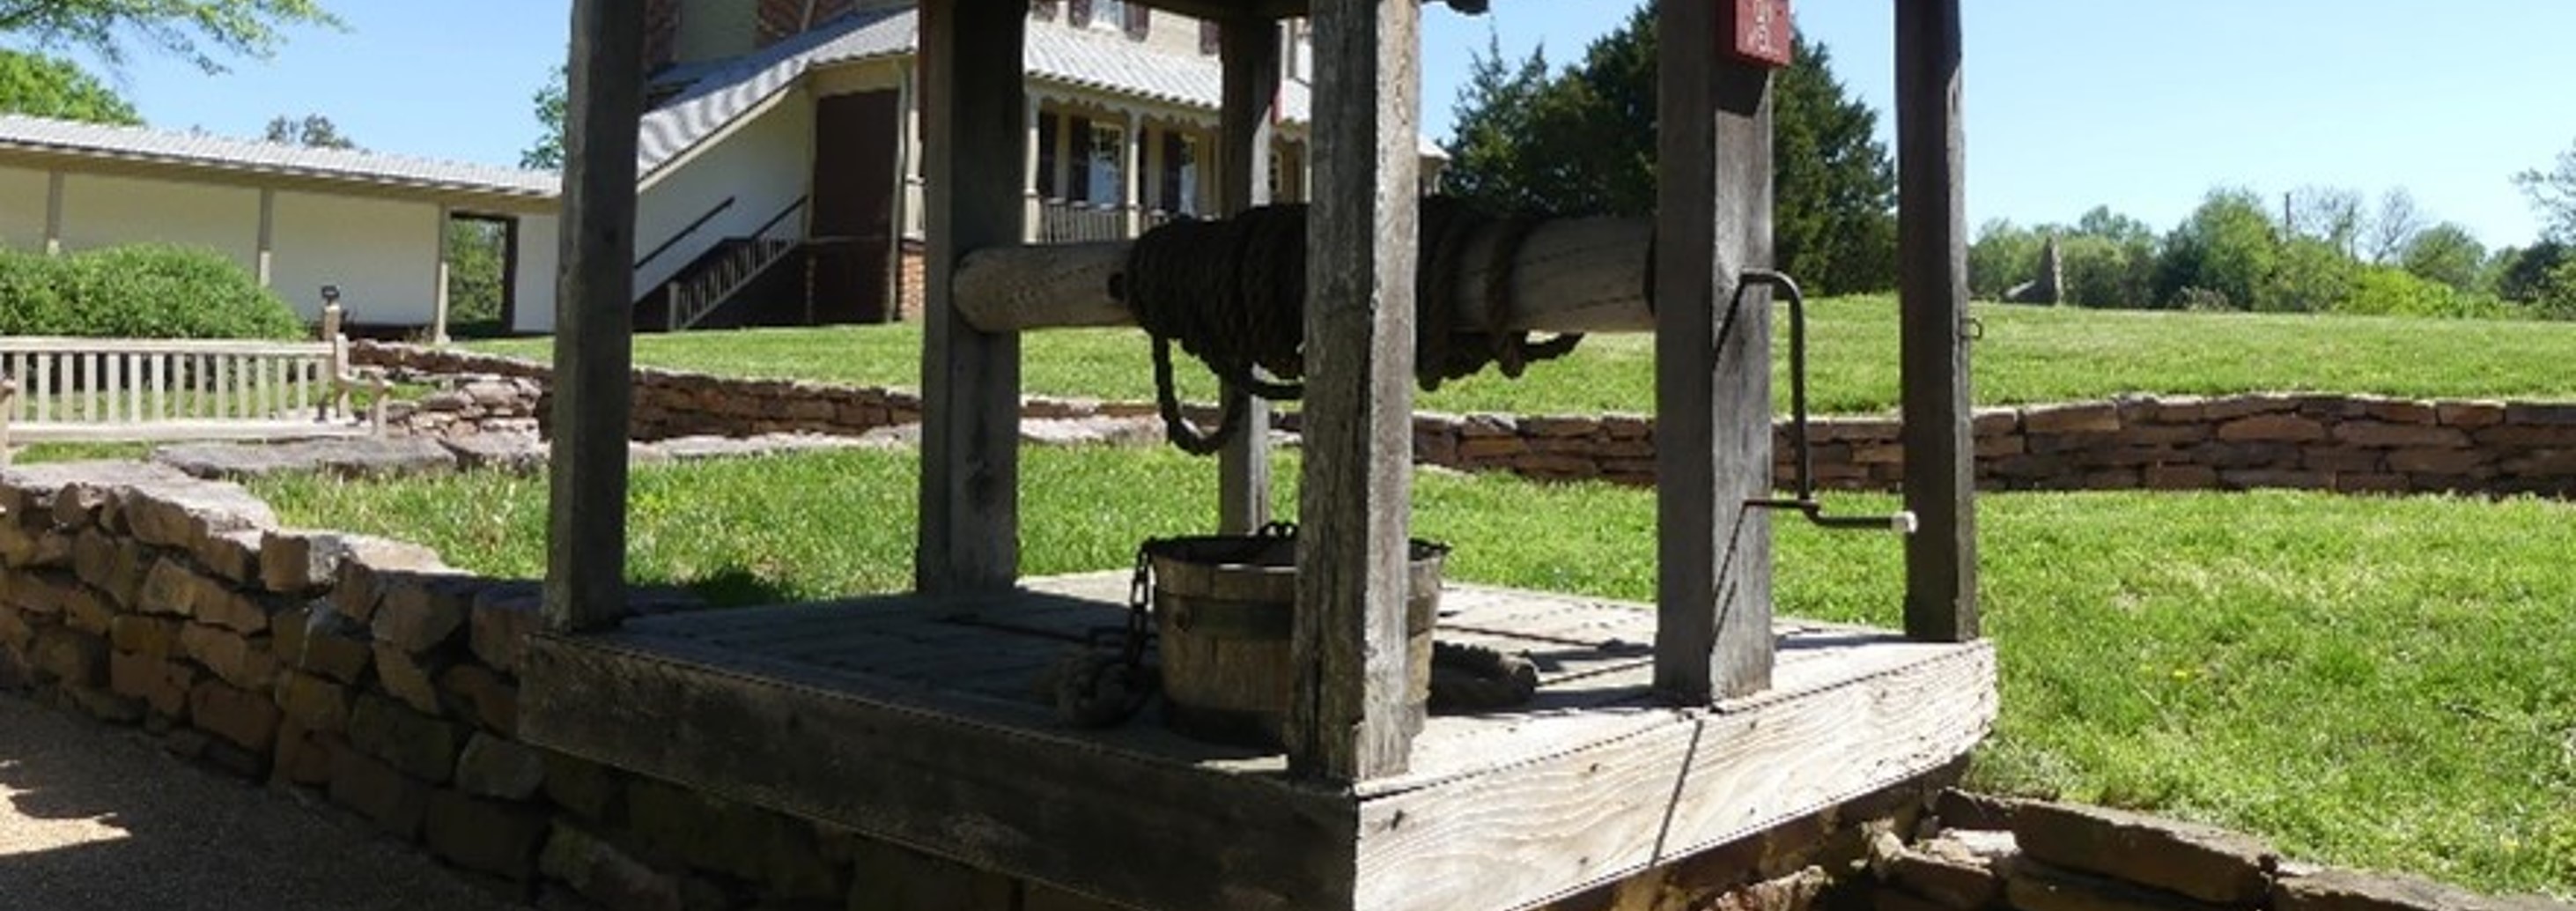 a well at Sully Historic Site